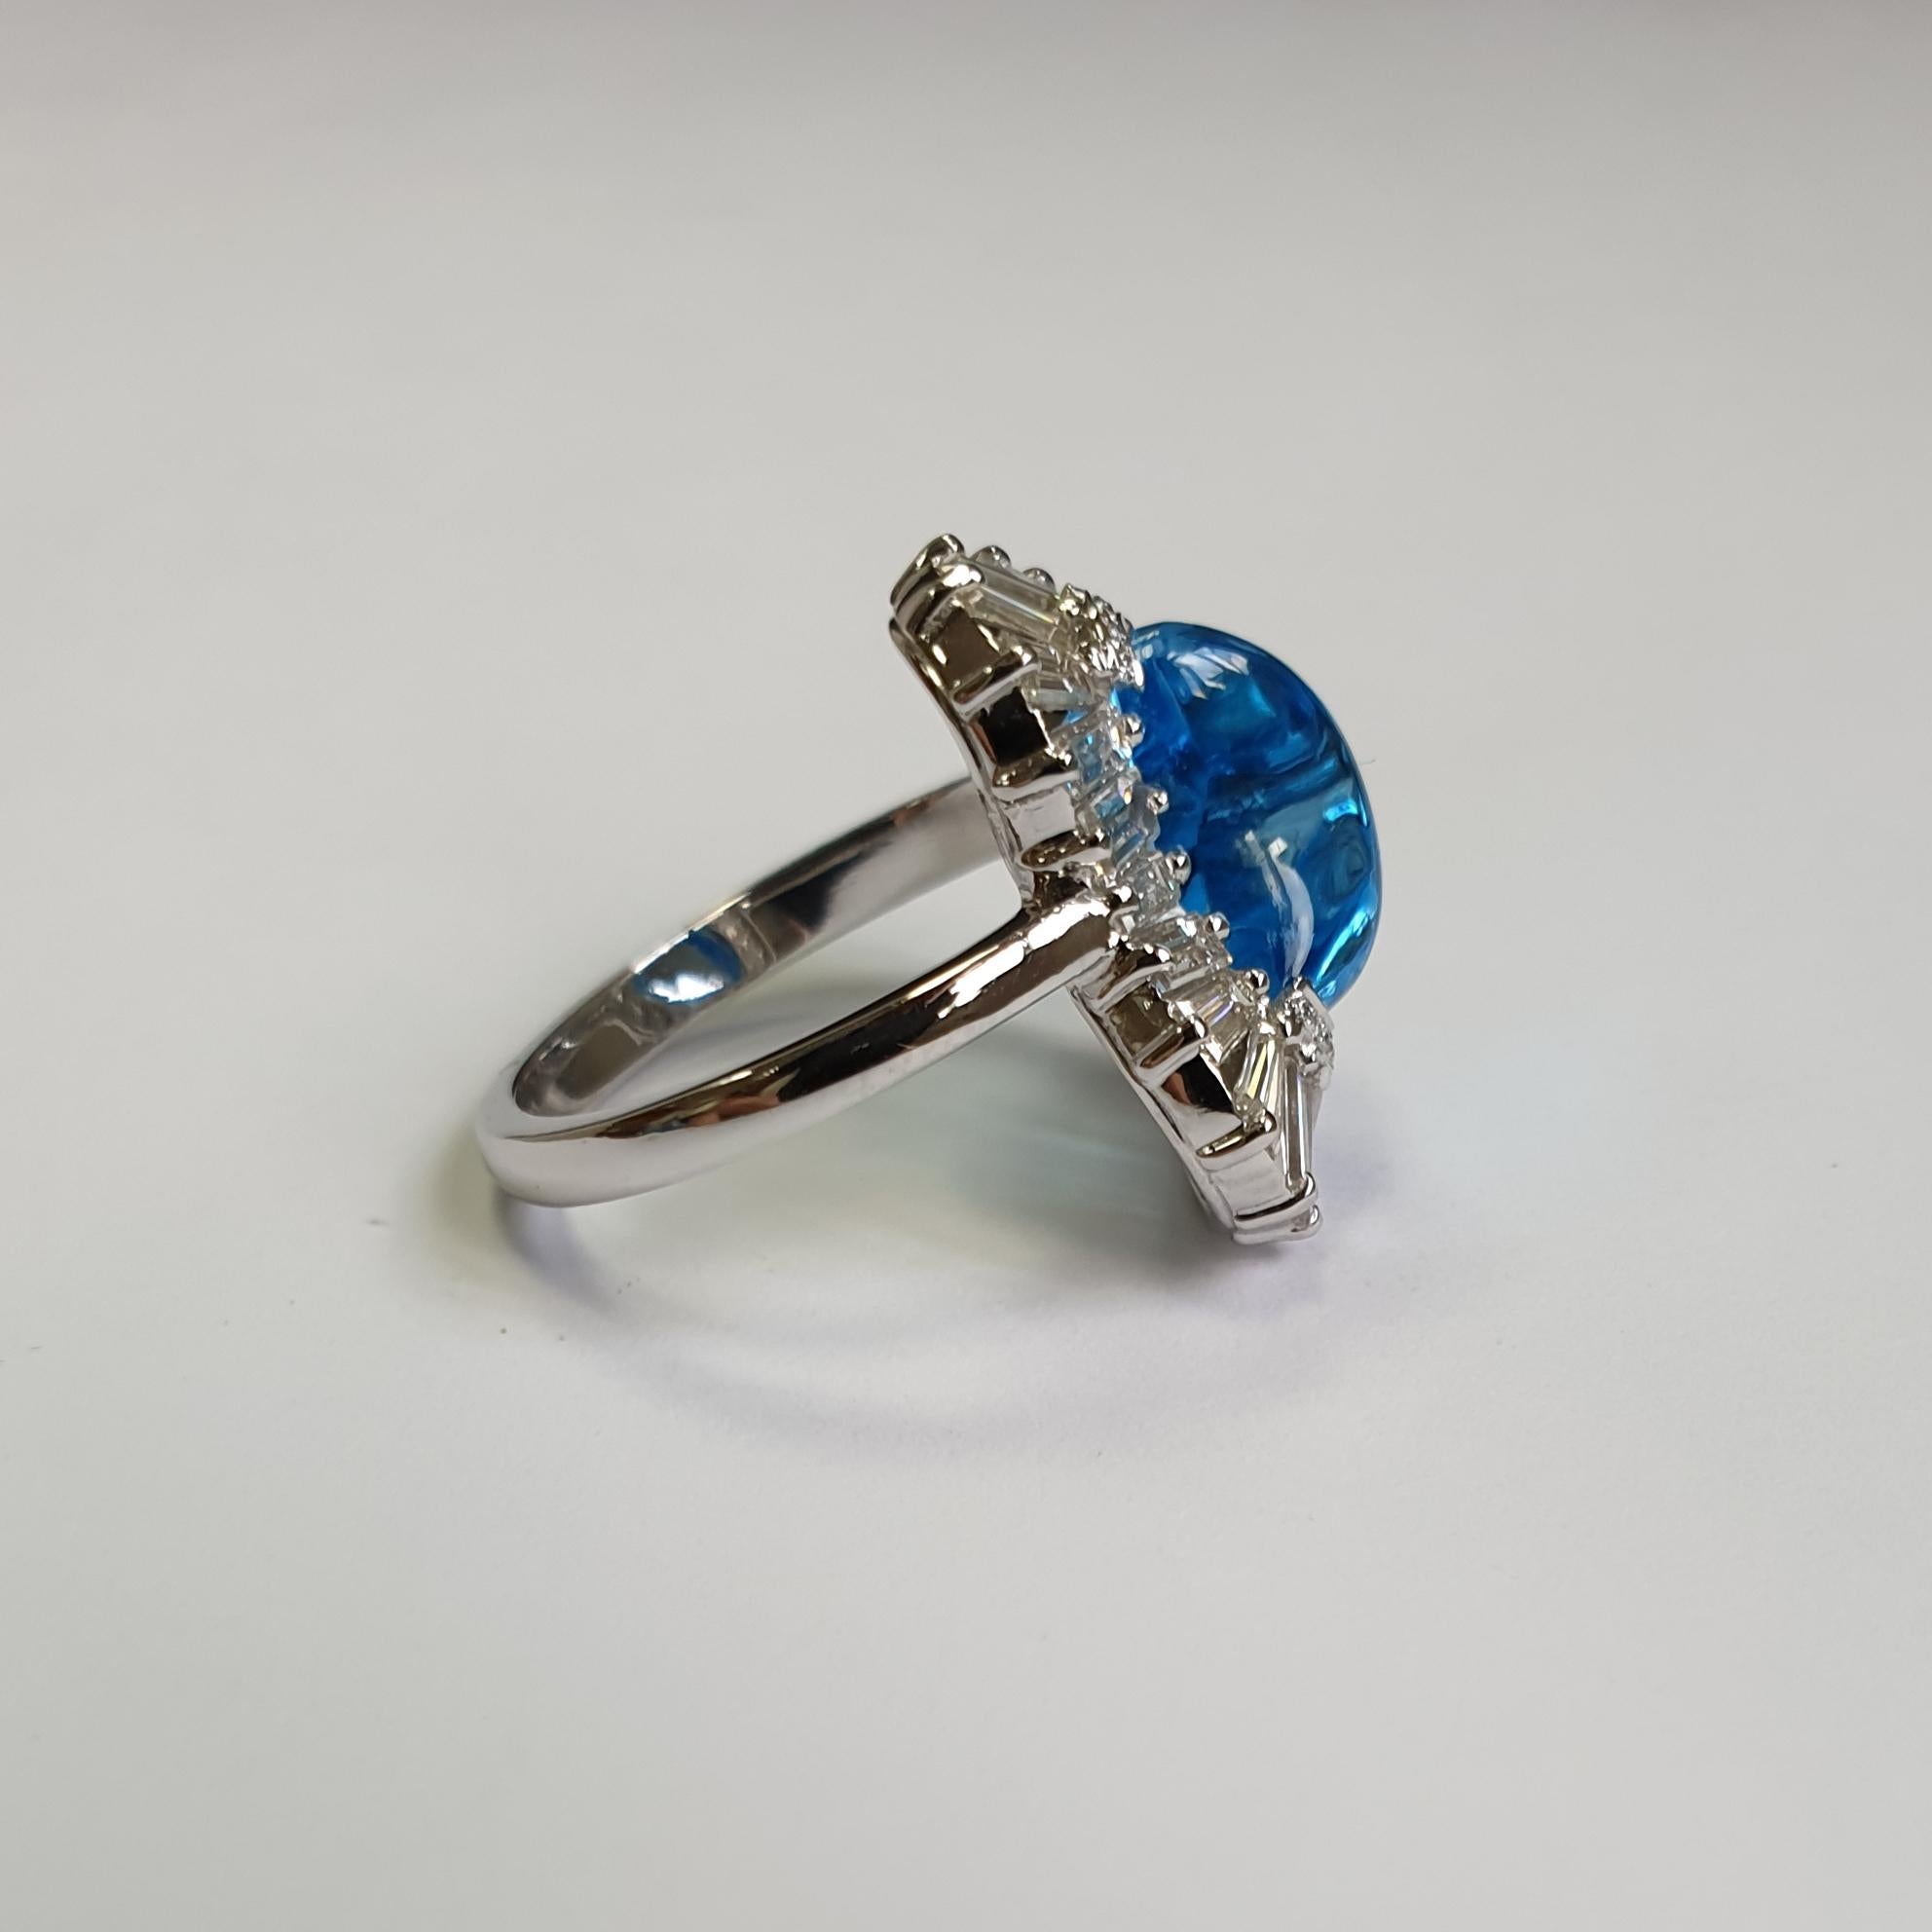 Sugar Loaf Topaz and Diamond Baguette Cocktail Ring Platinum In New Condition For Sale In London, London